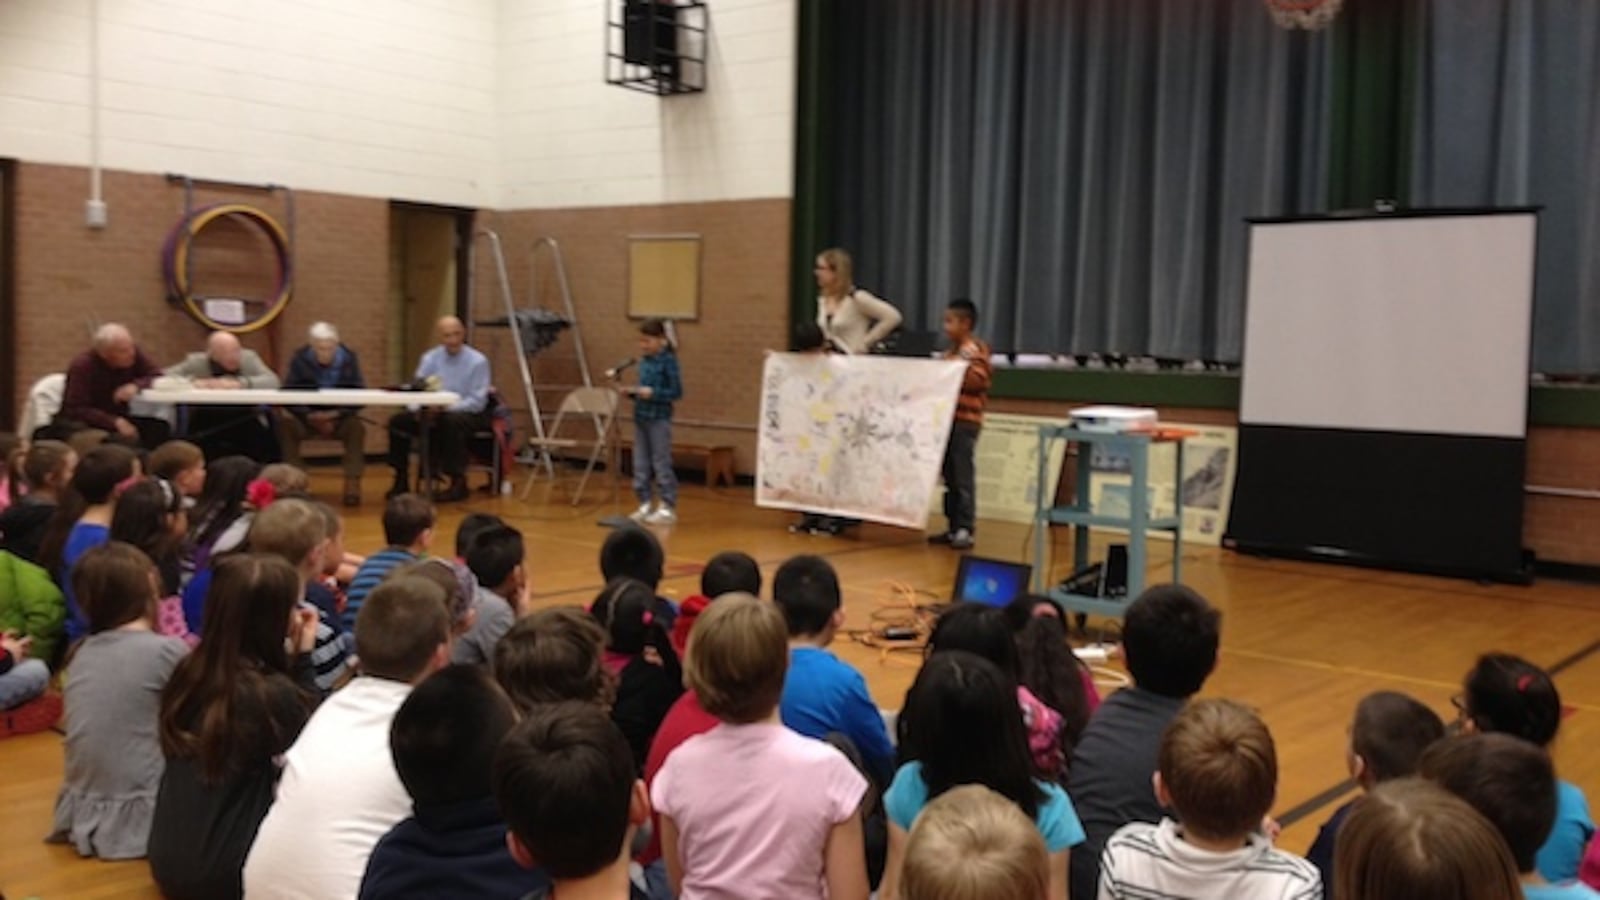 Students present to Tenth Mountain Division veterans during a third grade mini-expedition at West Park Elementary.